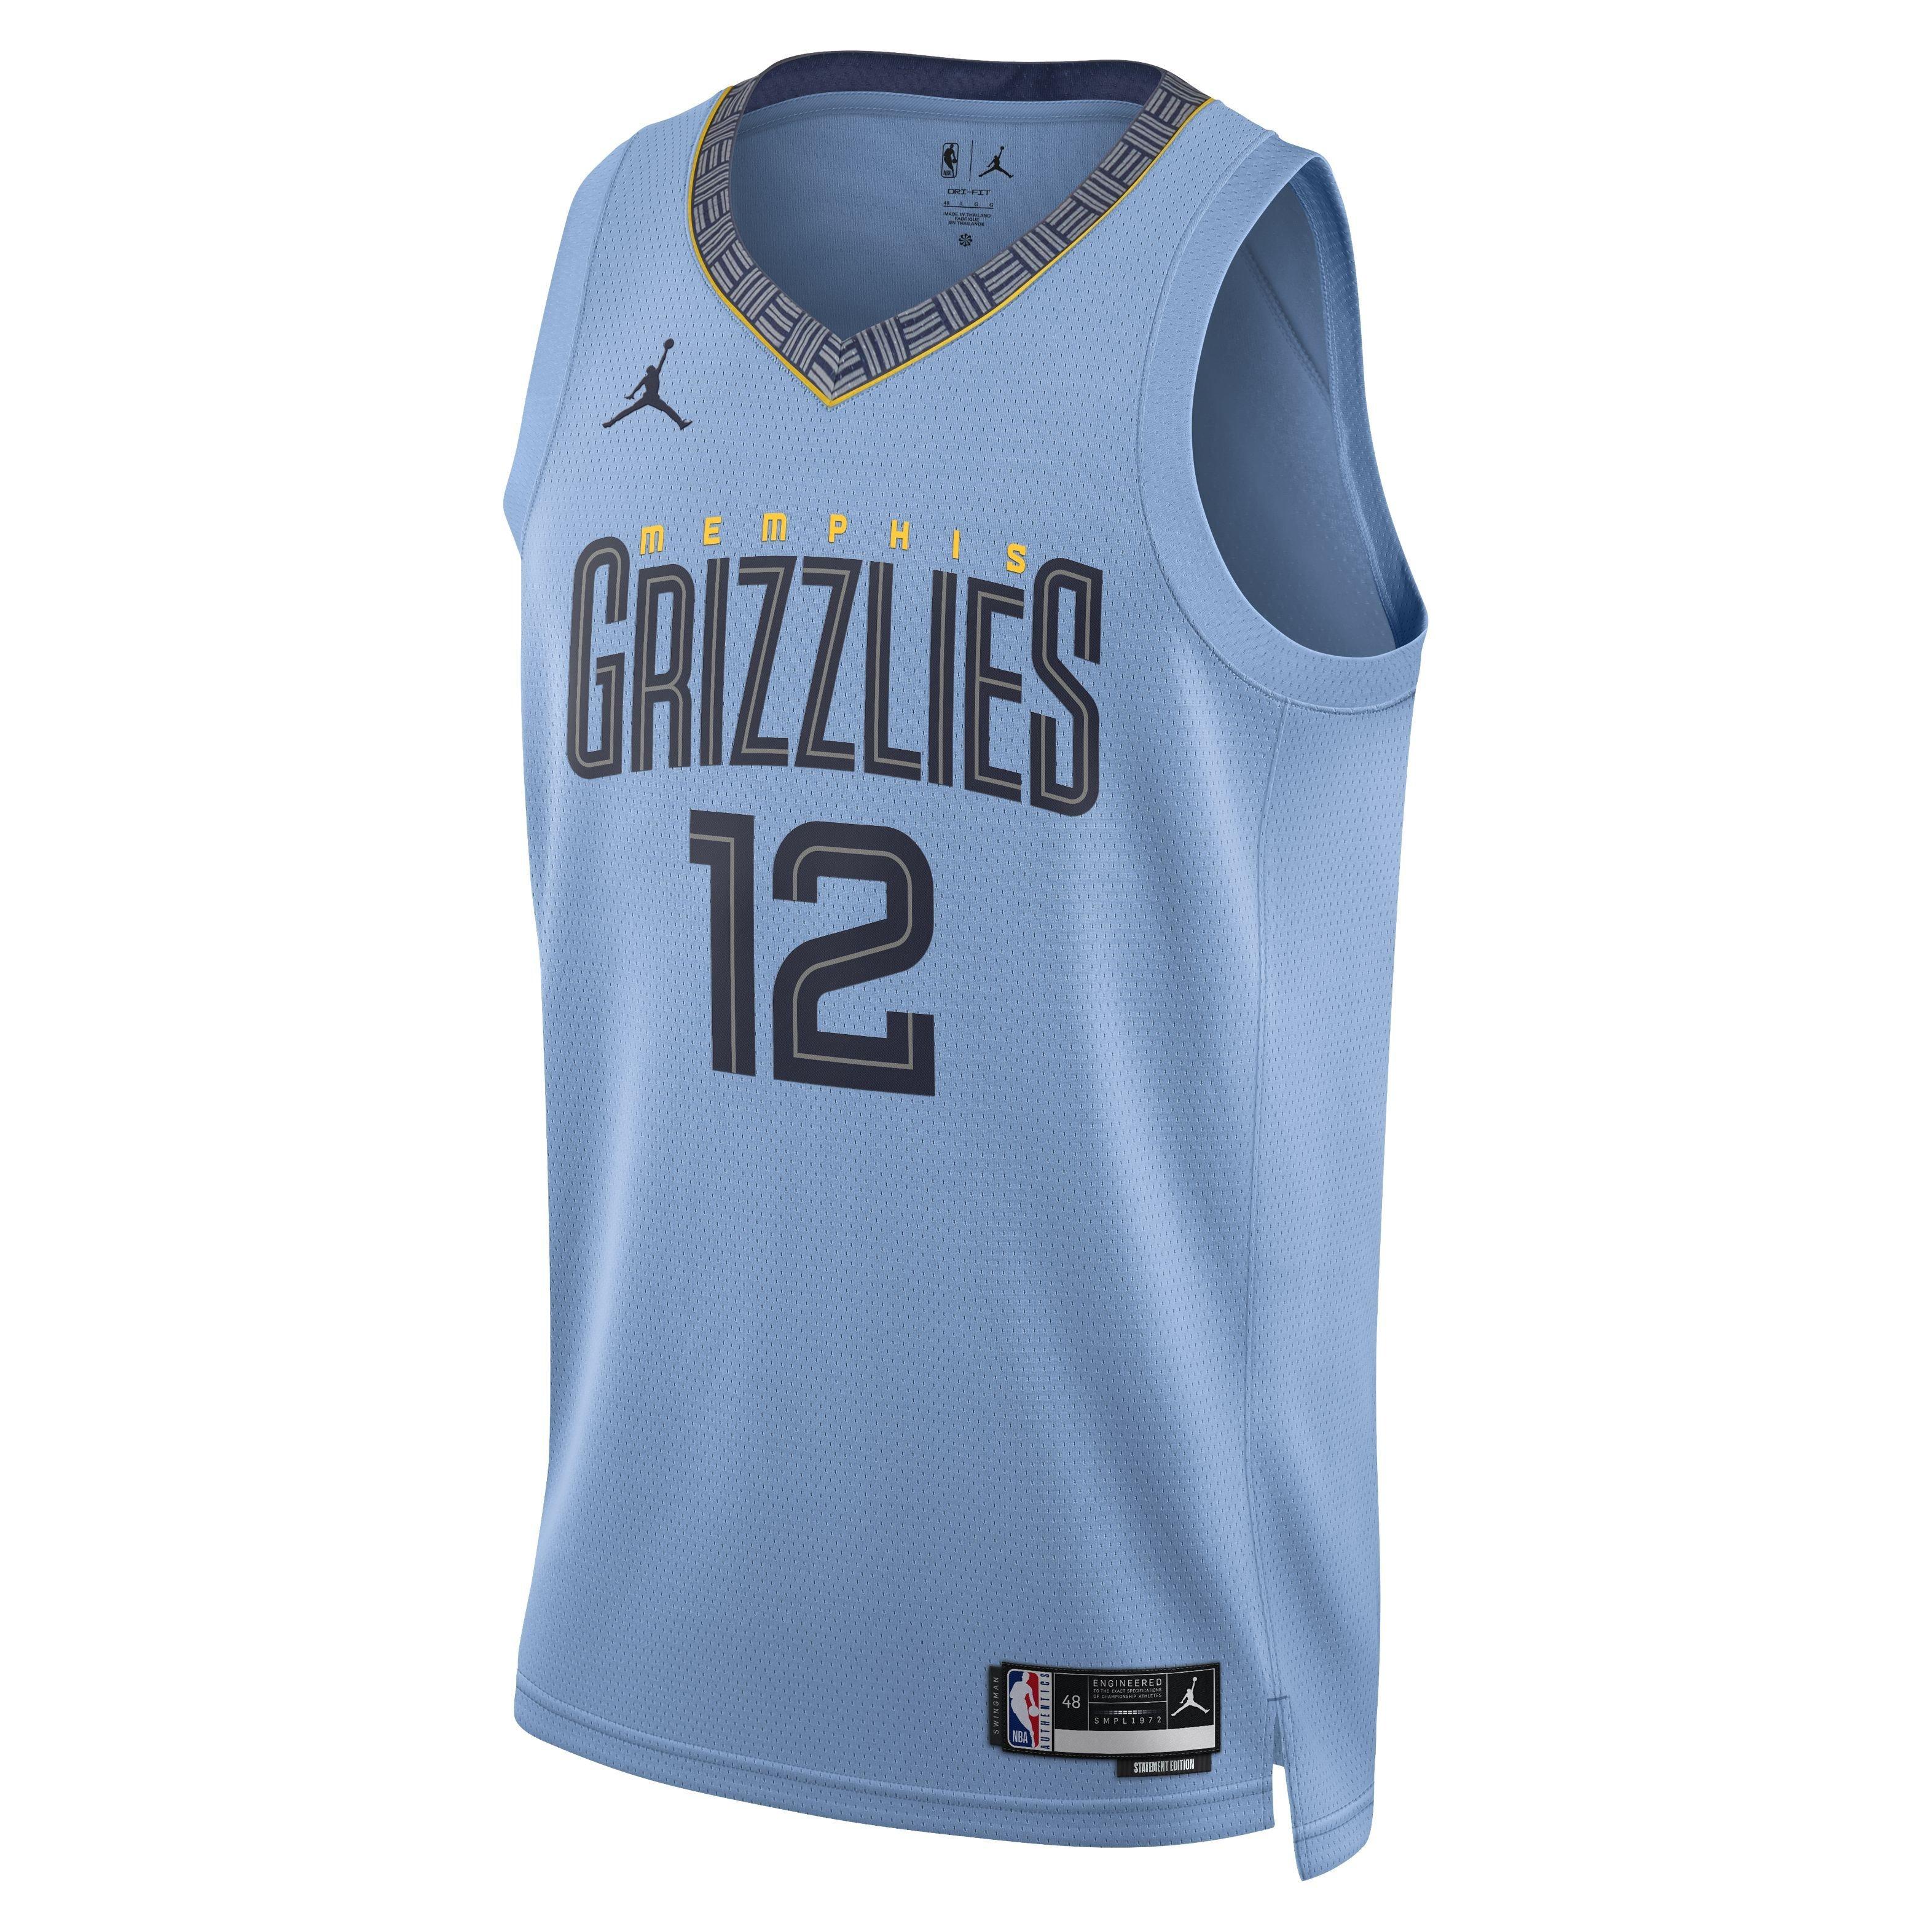 Memphis Grizzlies Jerseys  Curbside Pickup Available at DICK'S